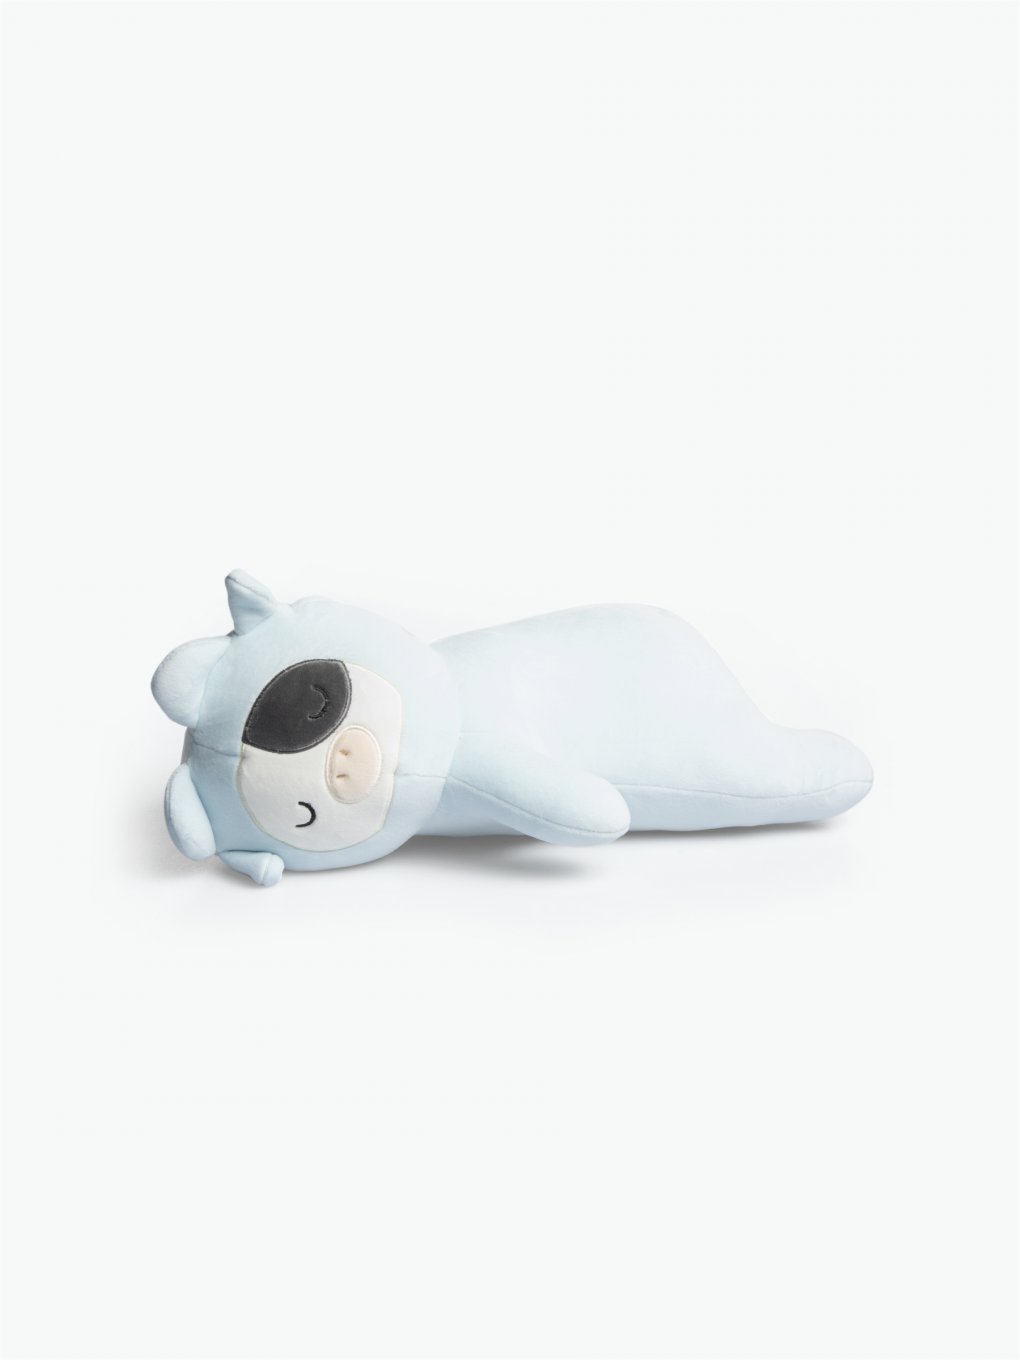 Space cow pillow